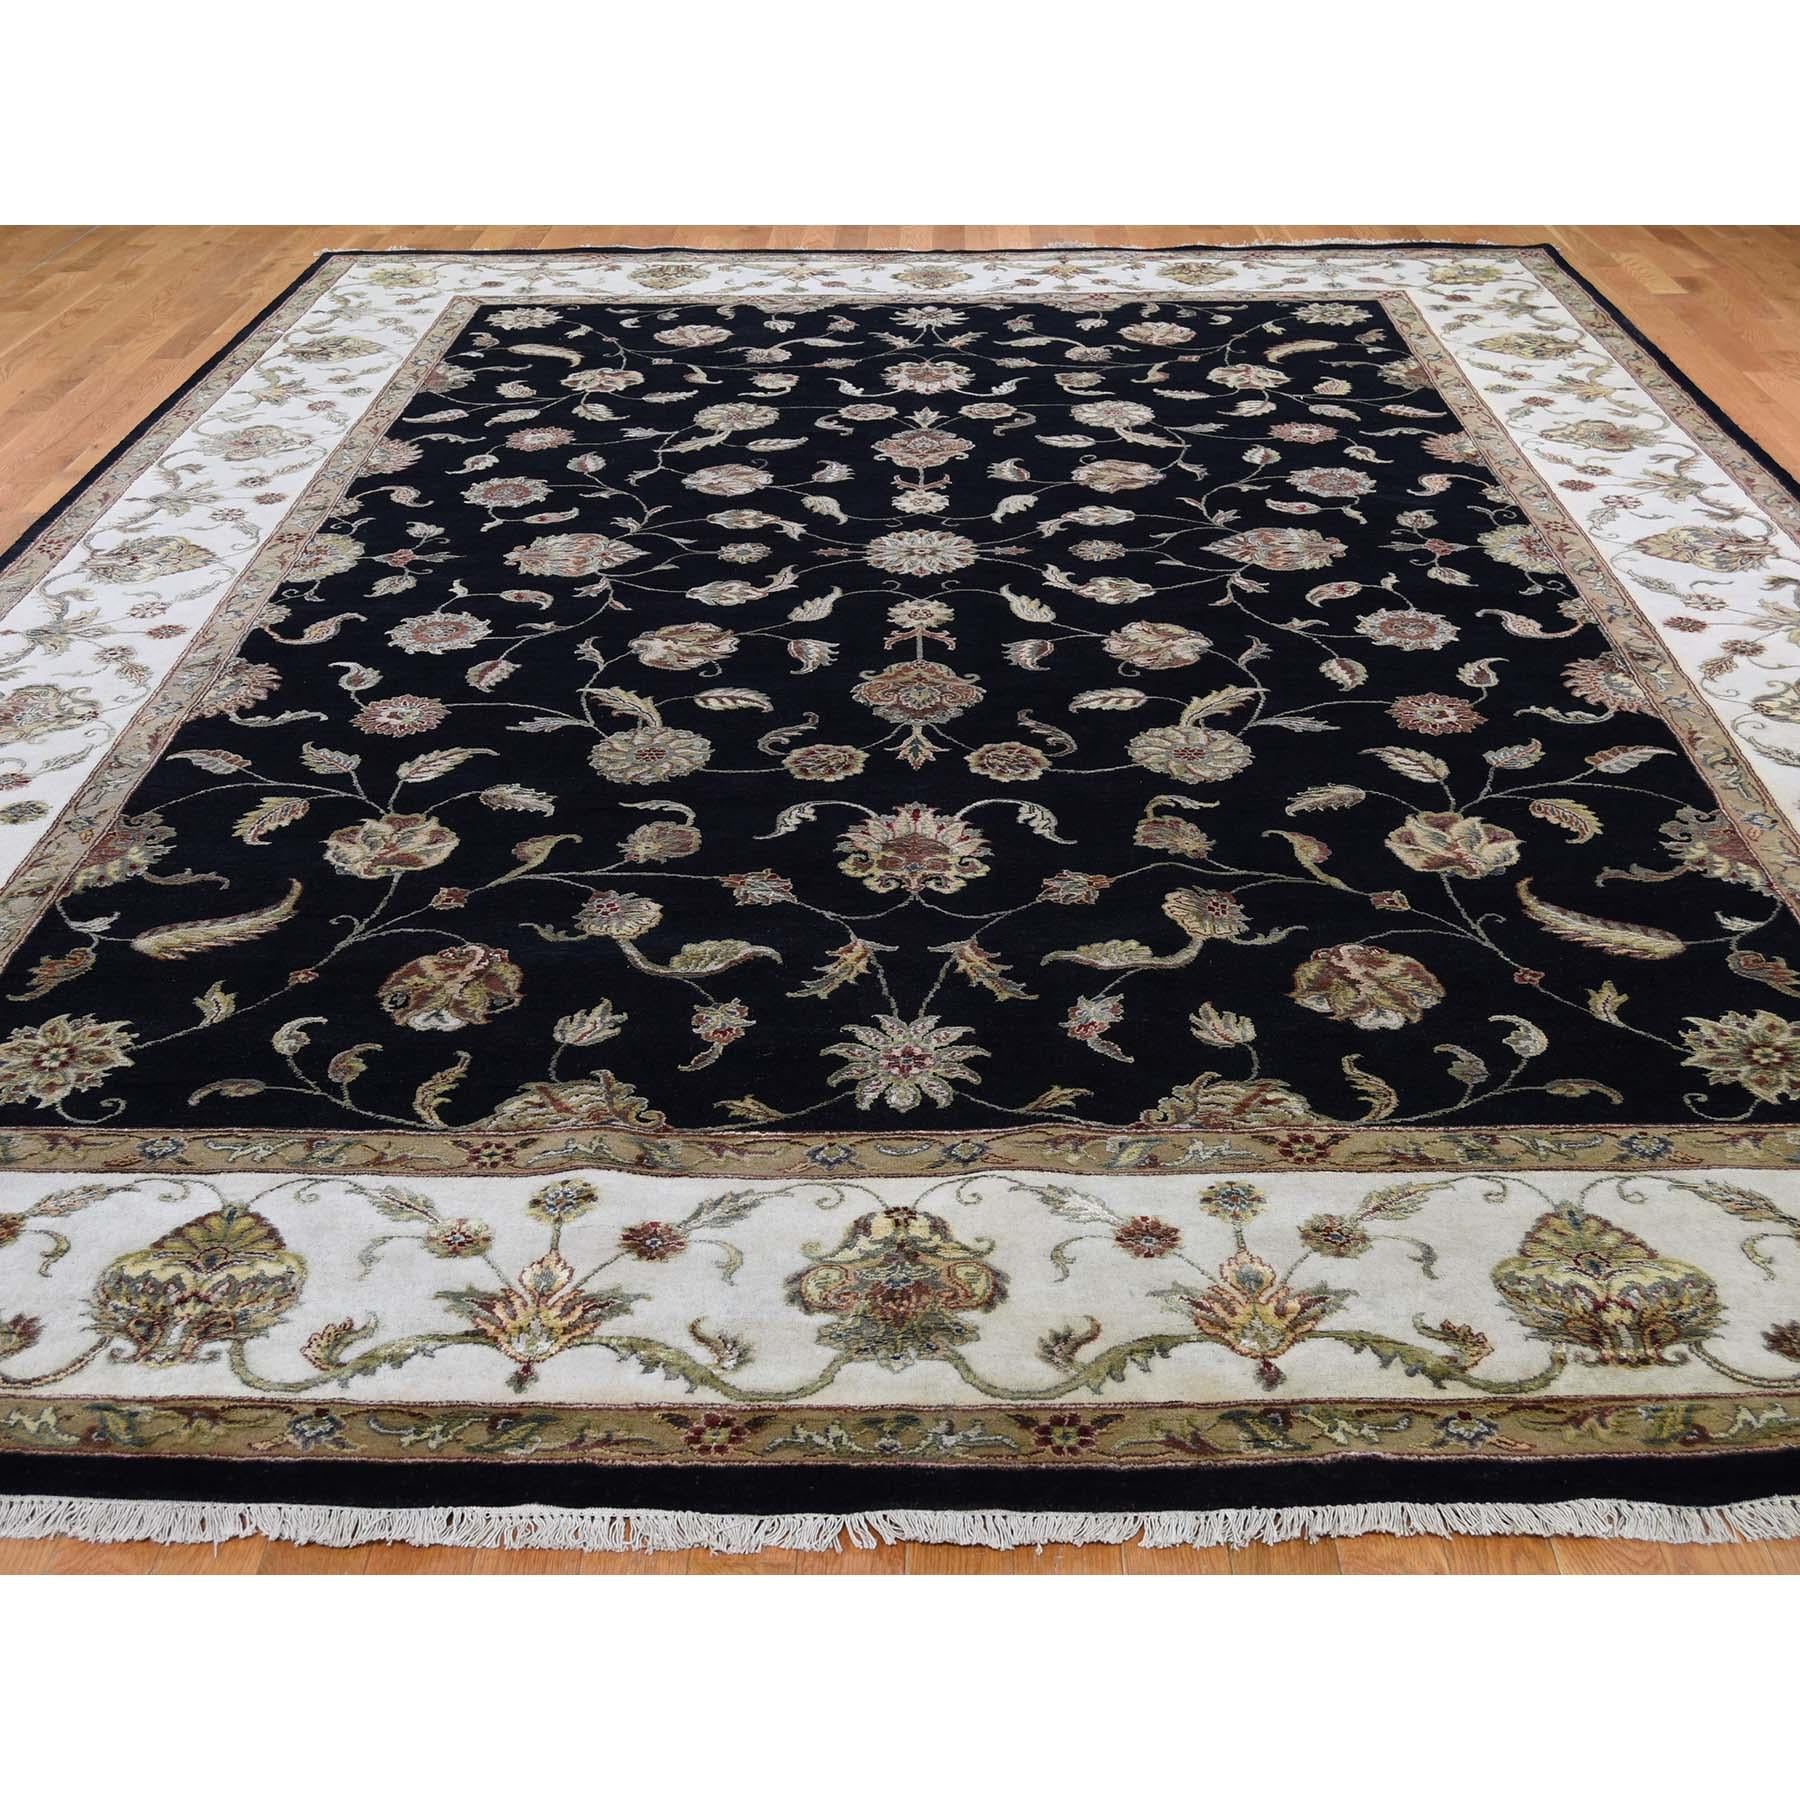 Other Rajasthan Half Wool and Half Silk Hand Knotted Oriental Rug